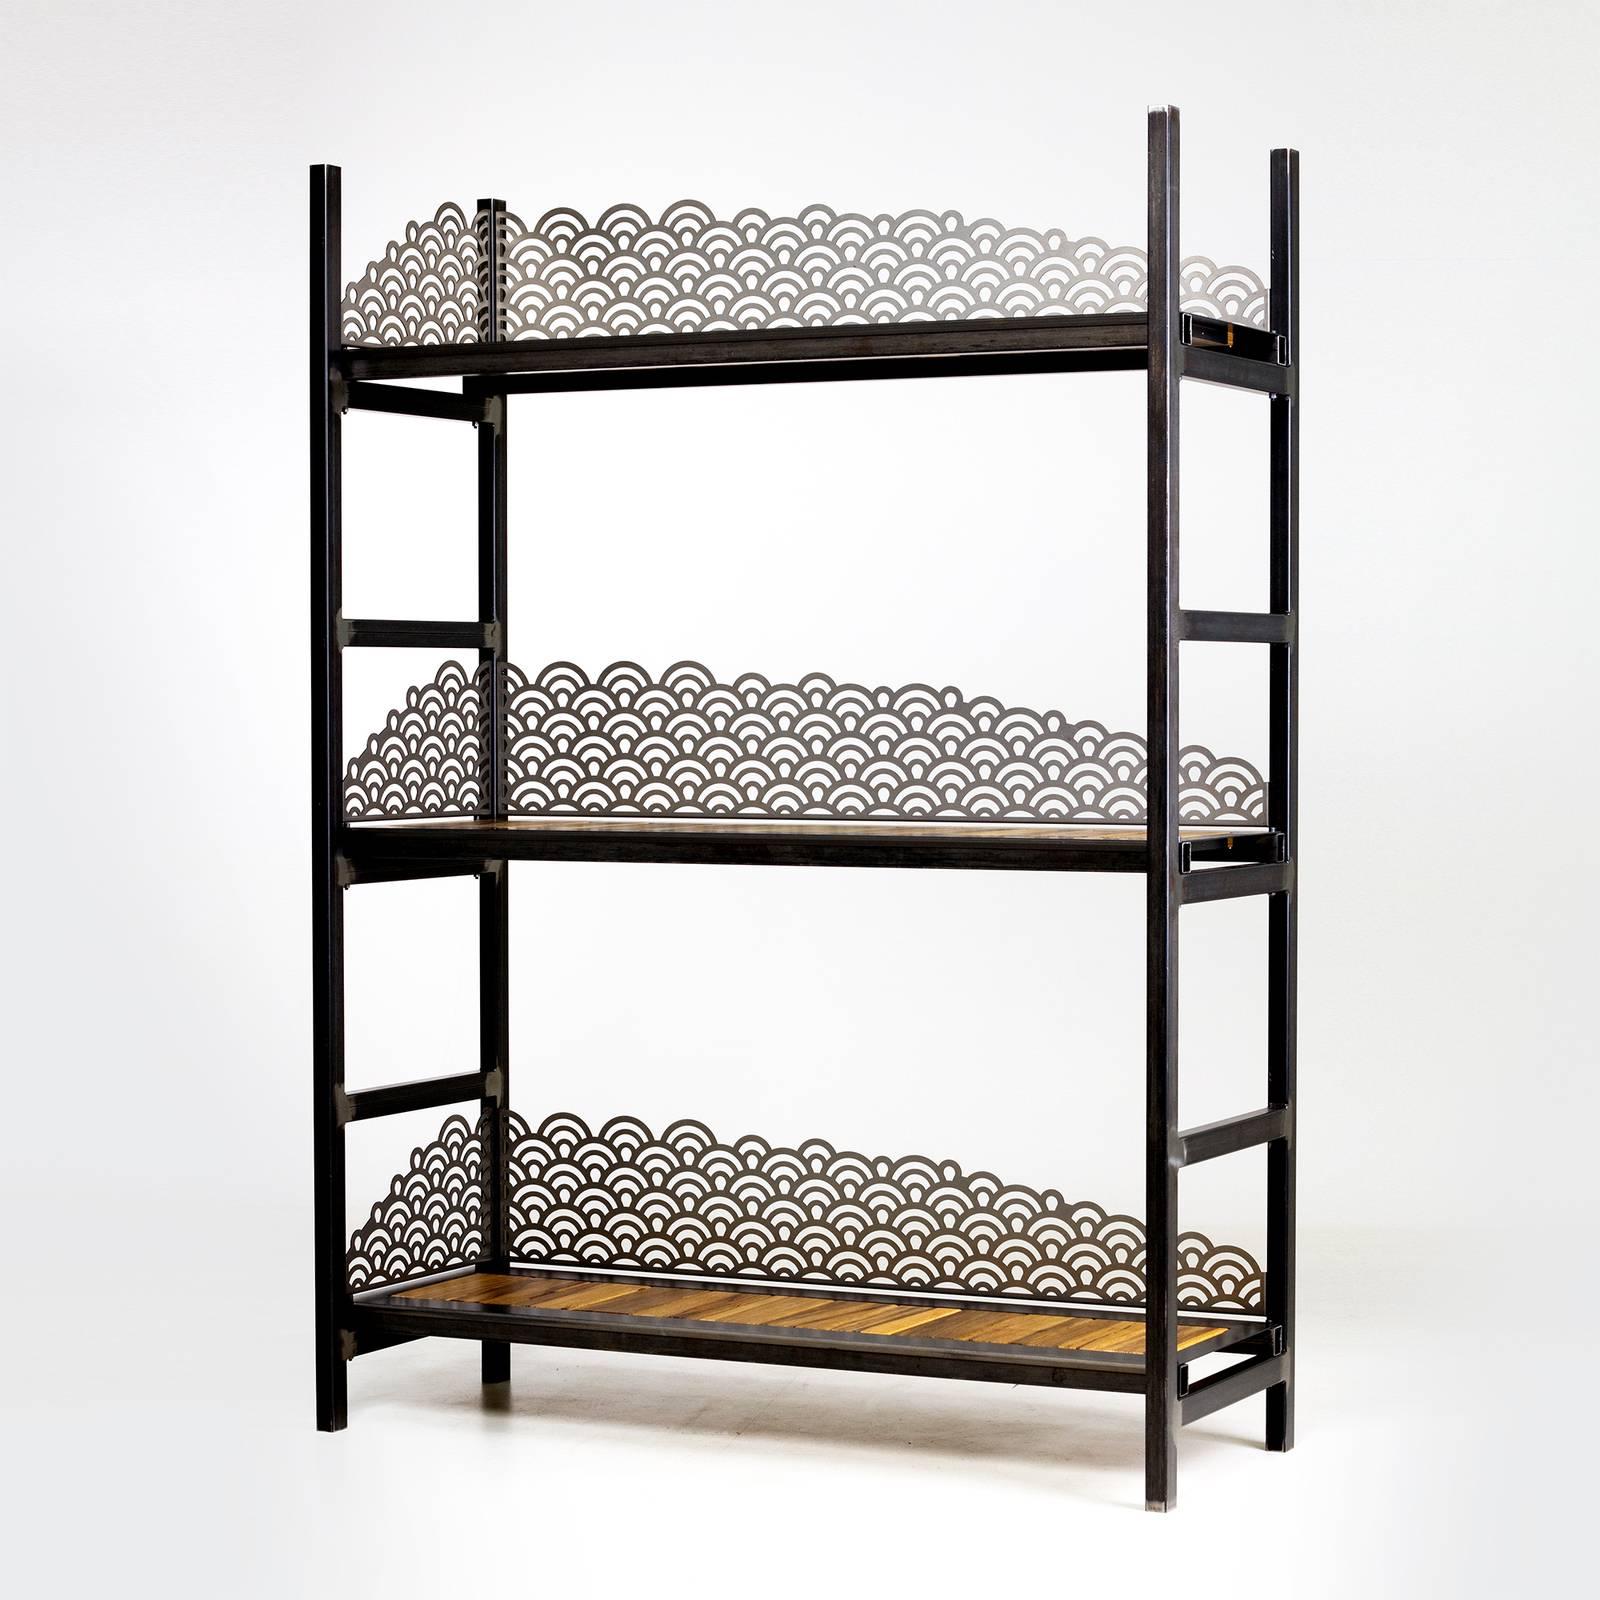 With its modern and elegant style that pairs modern design with industrial influence, this eye-catching bookcase from the Svevo collection will suit any interior, making a stylish anchor for any den or living room look. The open frame is handcrafted